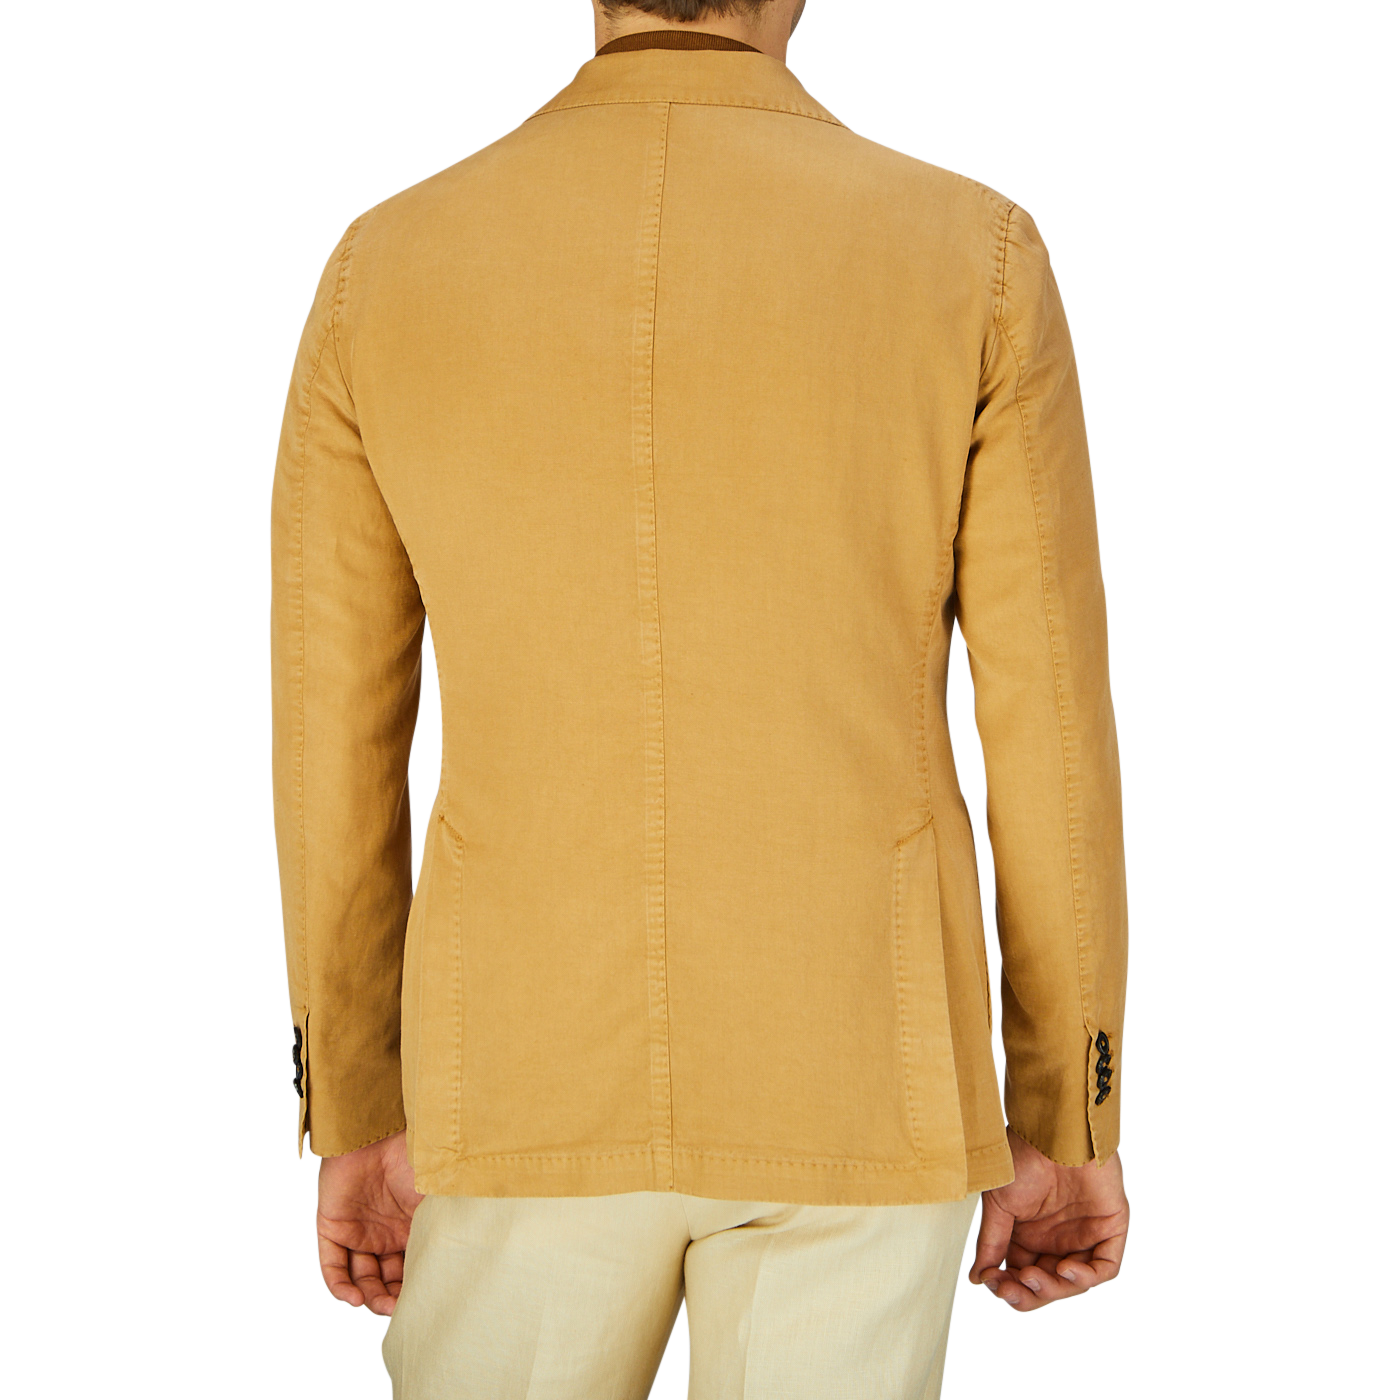 Rear view of a person wearing a Dark Beige Washed Cotton Linen Blazer by L.B.M. 1911 with a straight seam down the back.